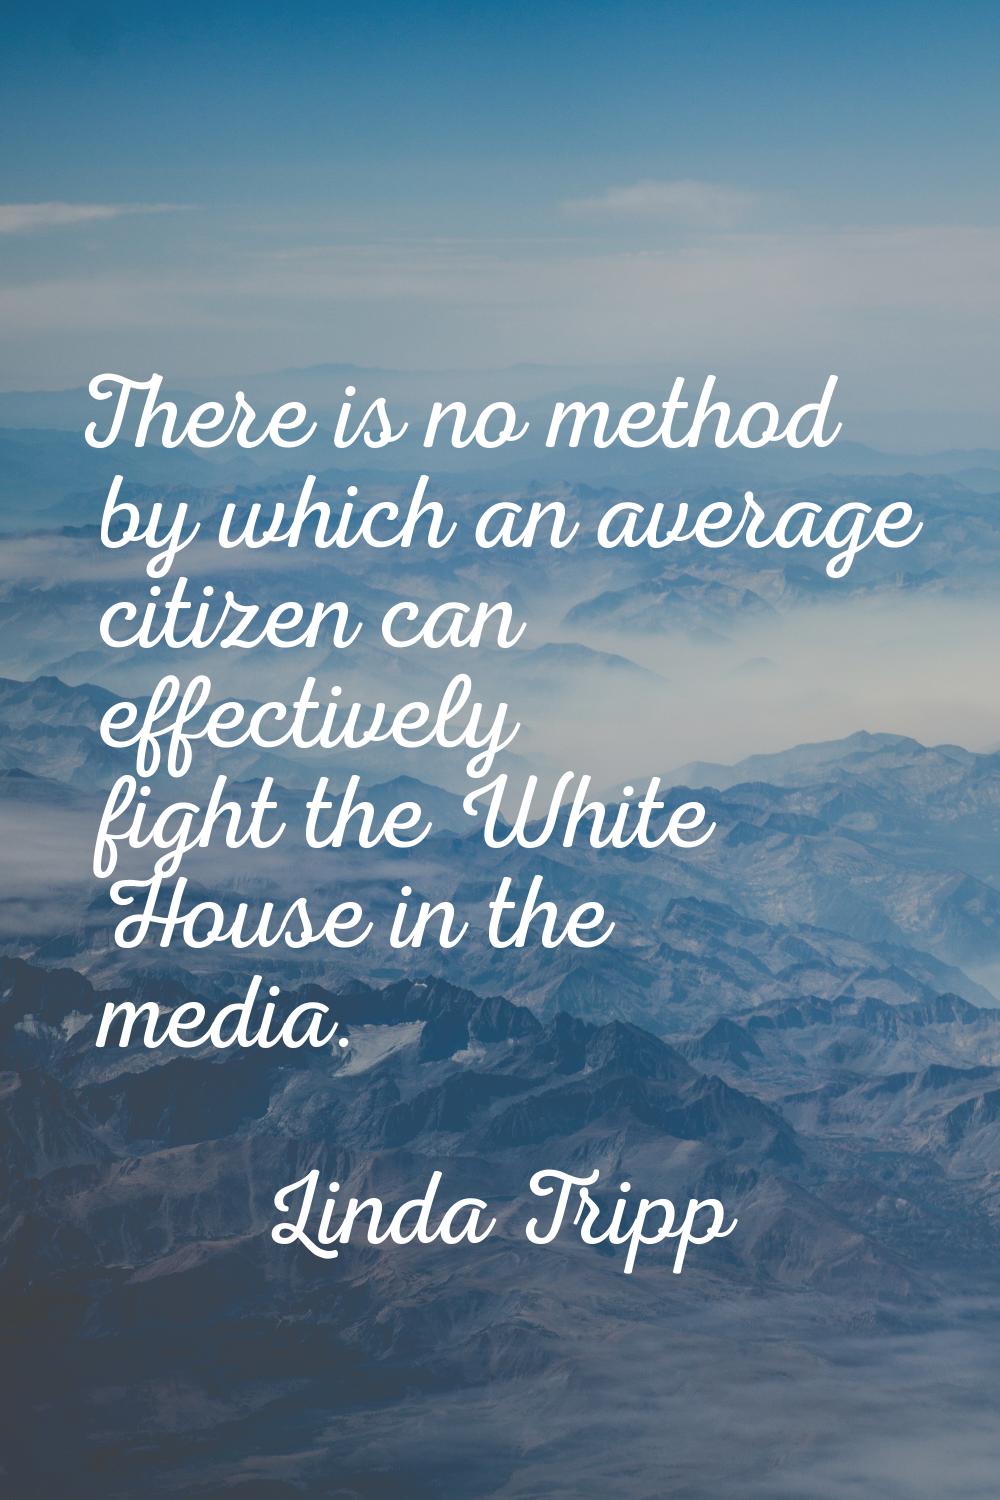 There is no method by which an average citizen can effectively fight the White House in the media.